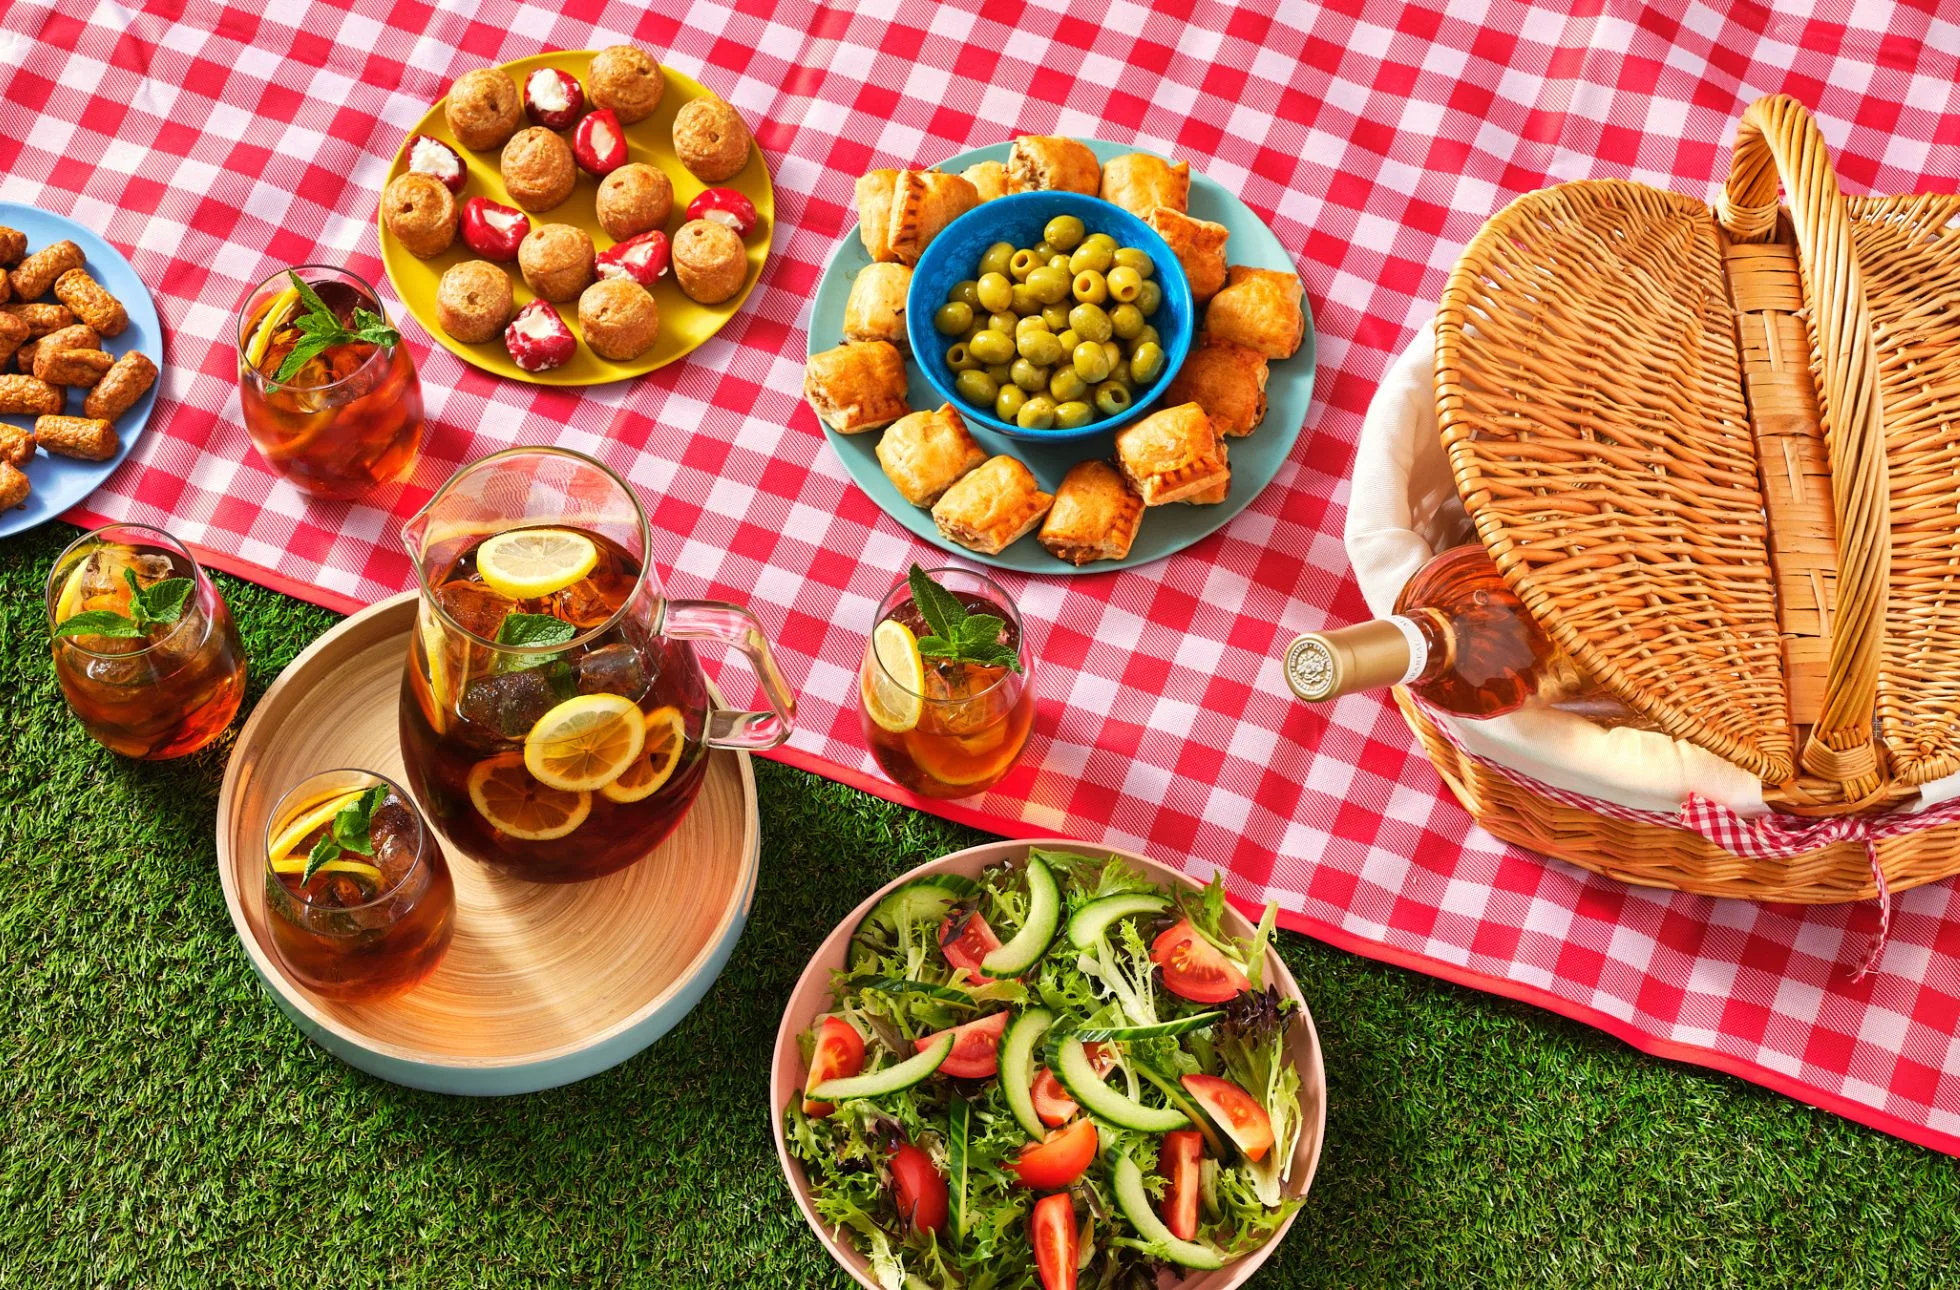 picnic blanket and hamper with rose wine, surrounded by picnic snacks and olives with a jug of refreshing iced tea